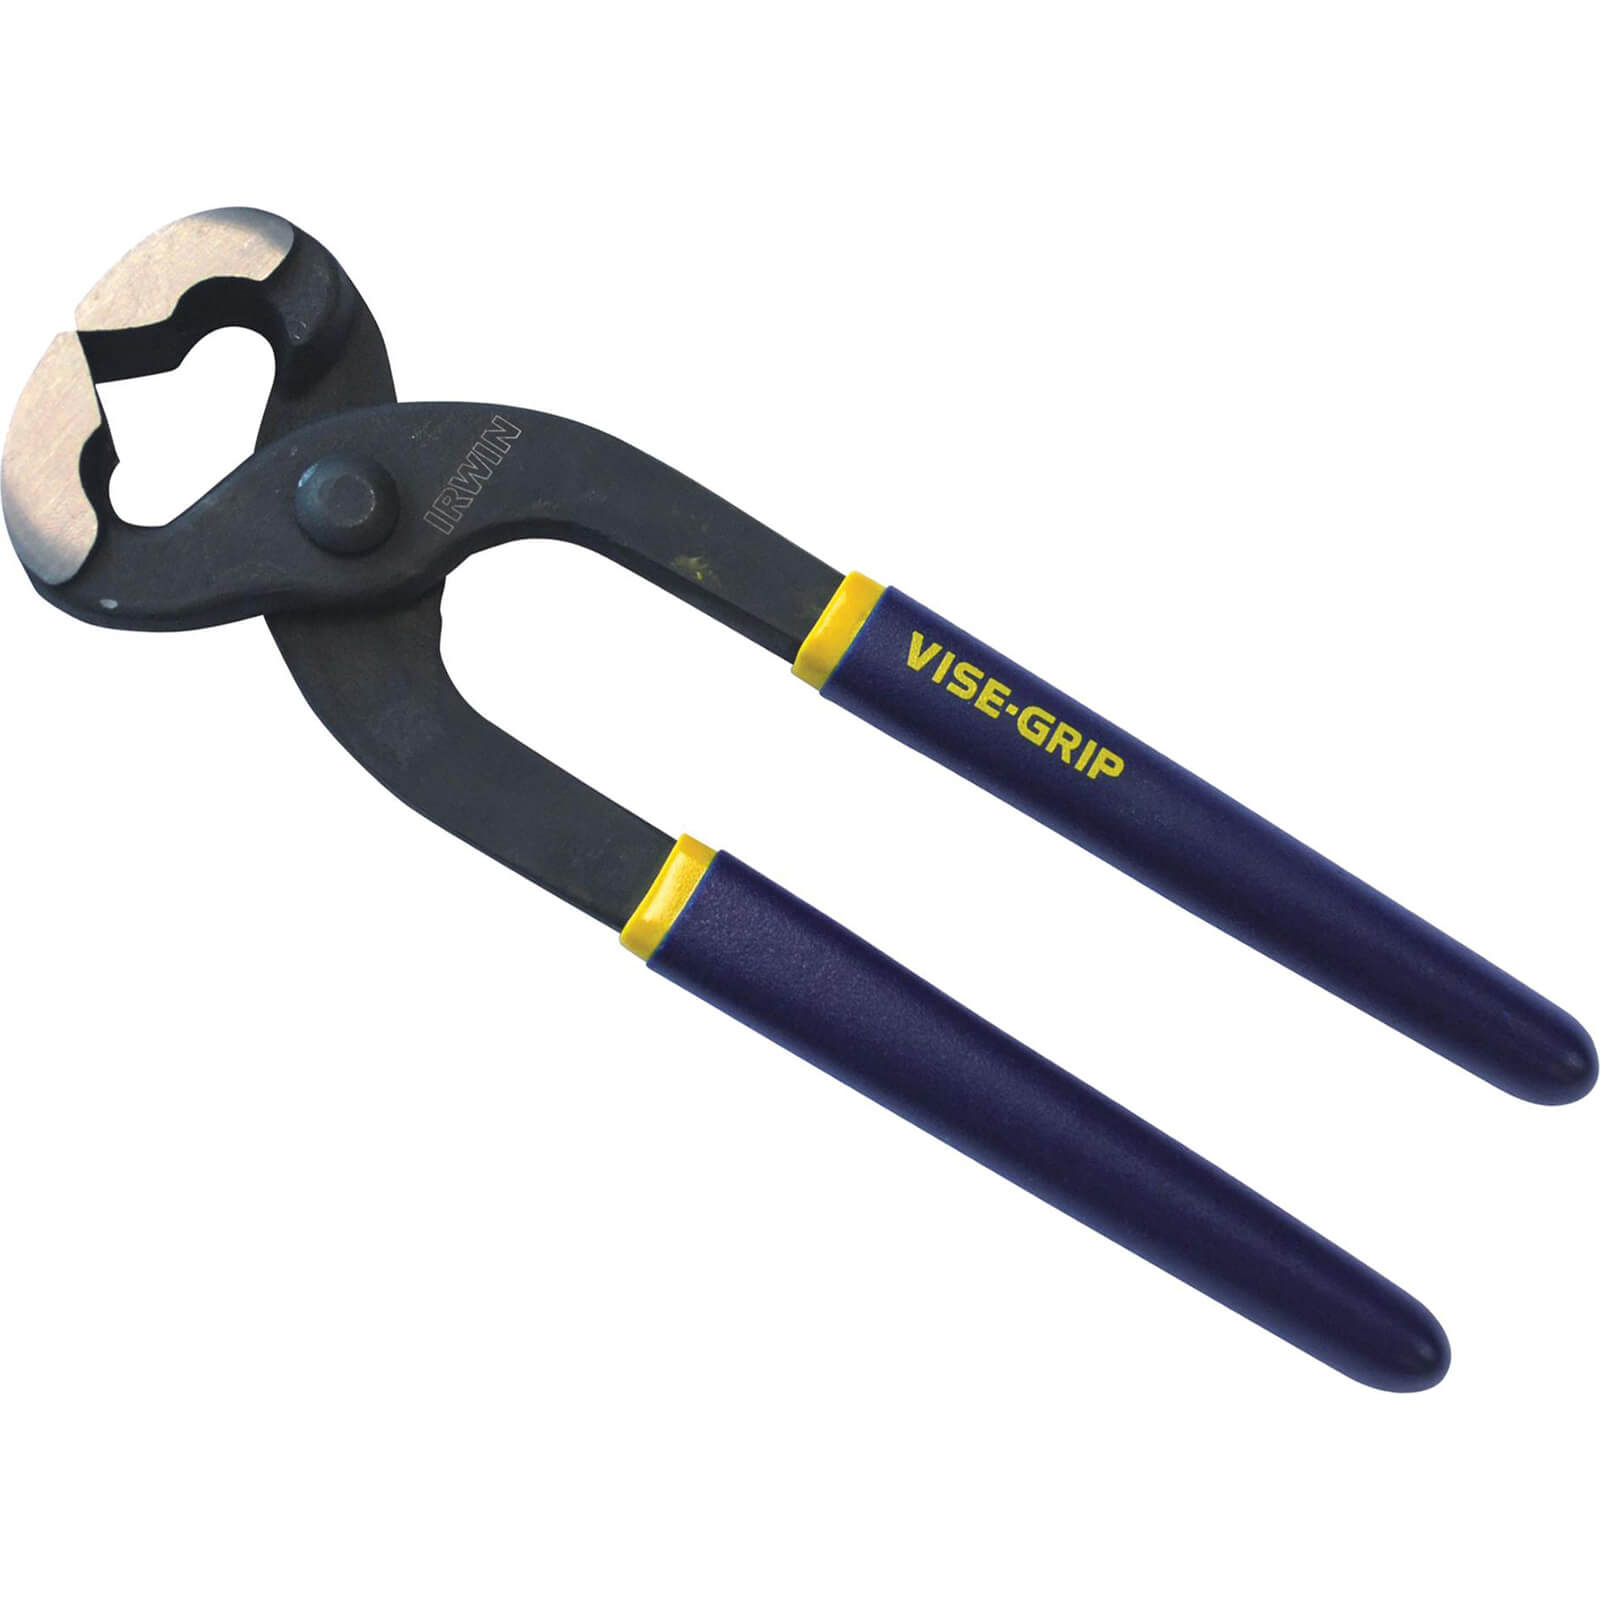 Photo of Irwin Vise Grip Nail Puller 200mm